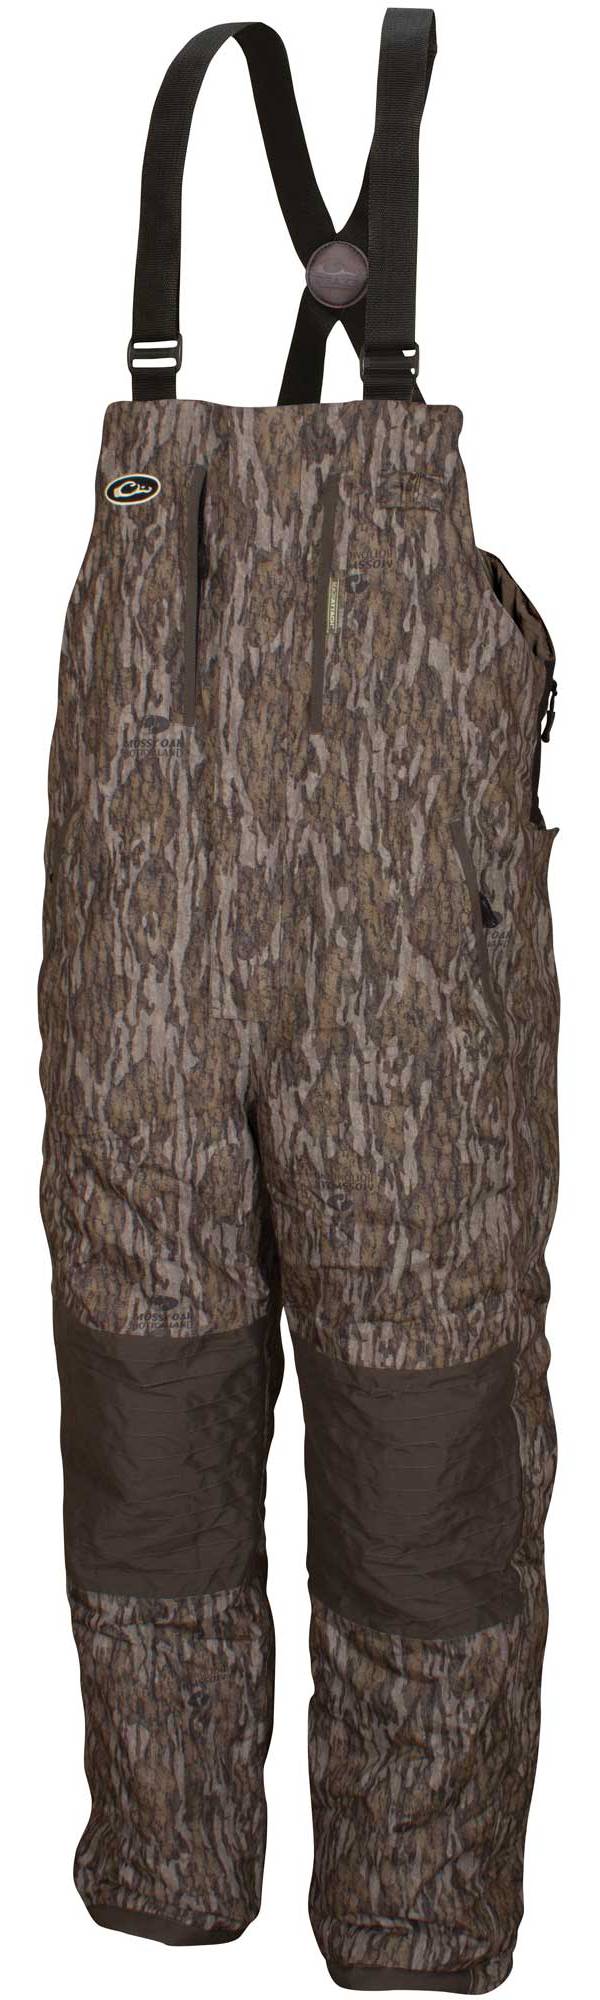 Drake Waterfowl Men's LST 2.0 Insulated Bibs product image